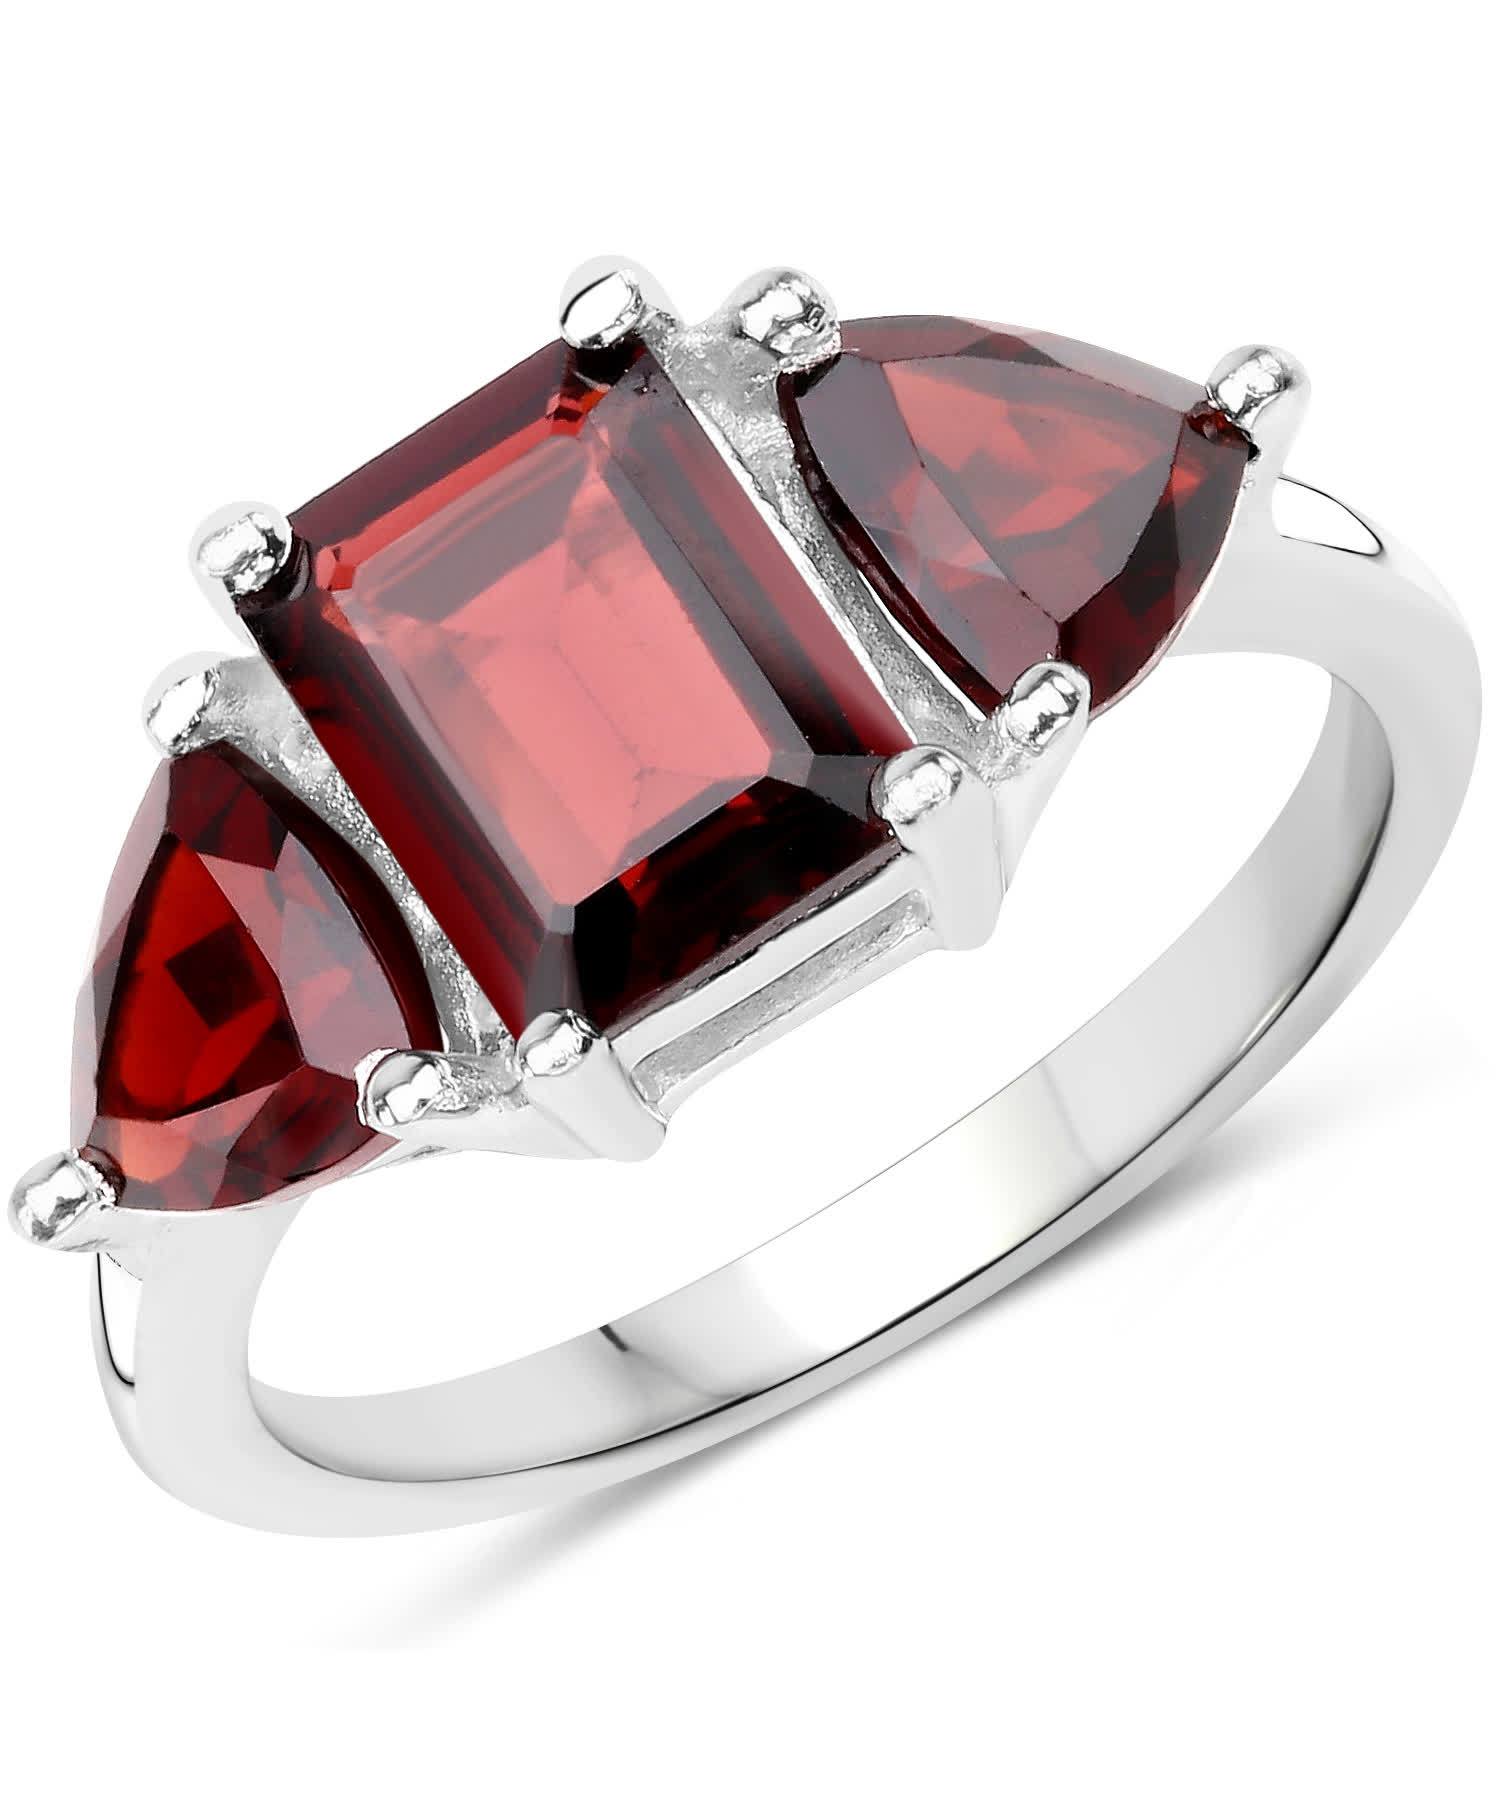 3.45ctw Natural Garnet Rhodium Plated 925 Sterling Silver Three-Stone Ring View 1